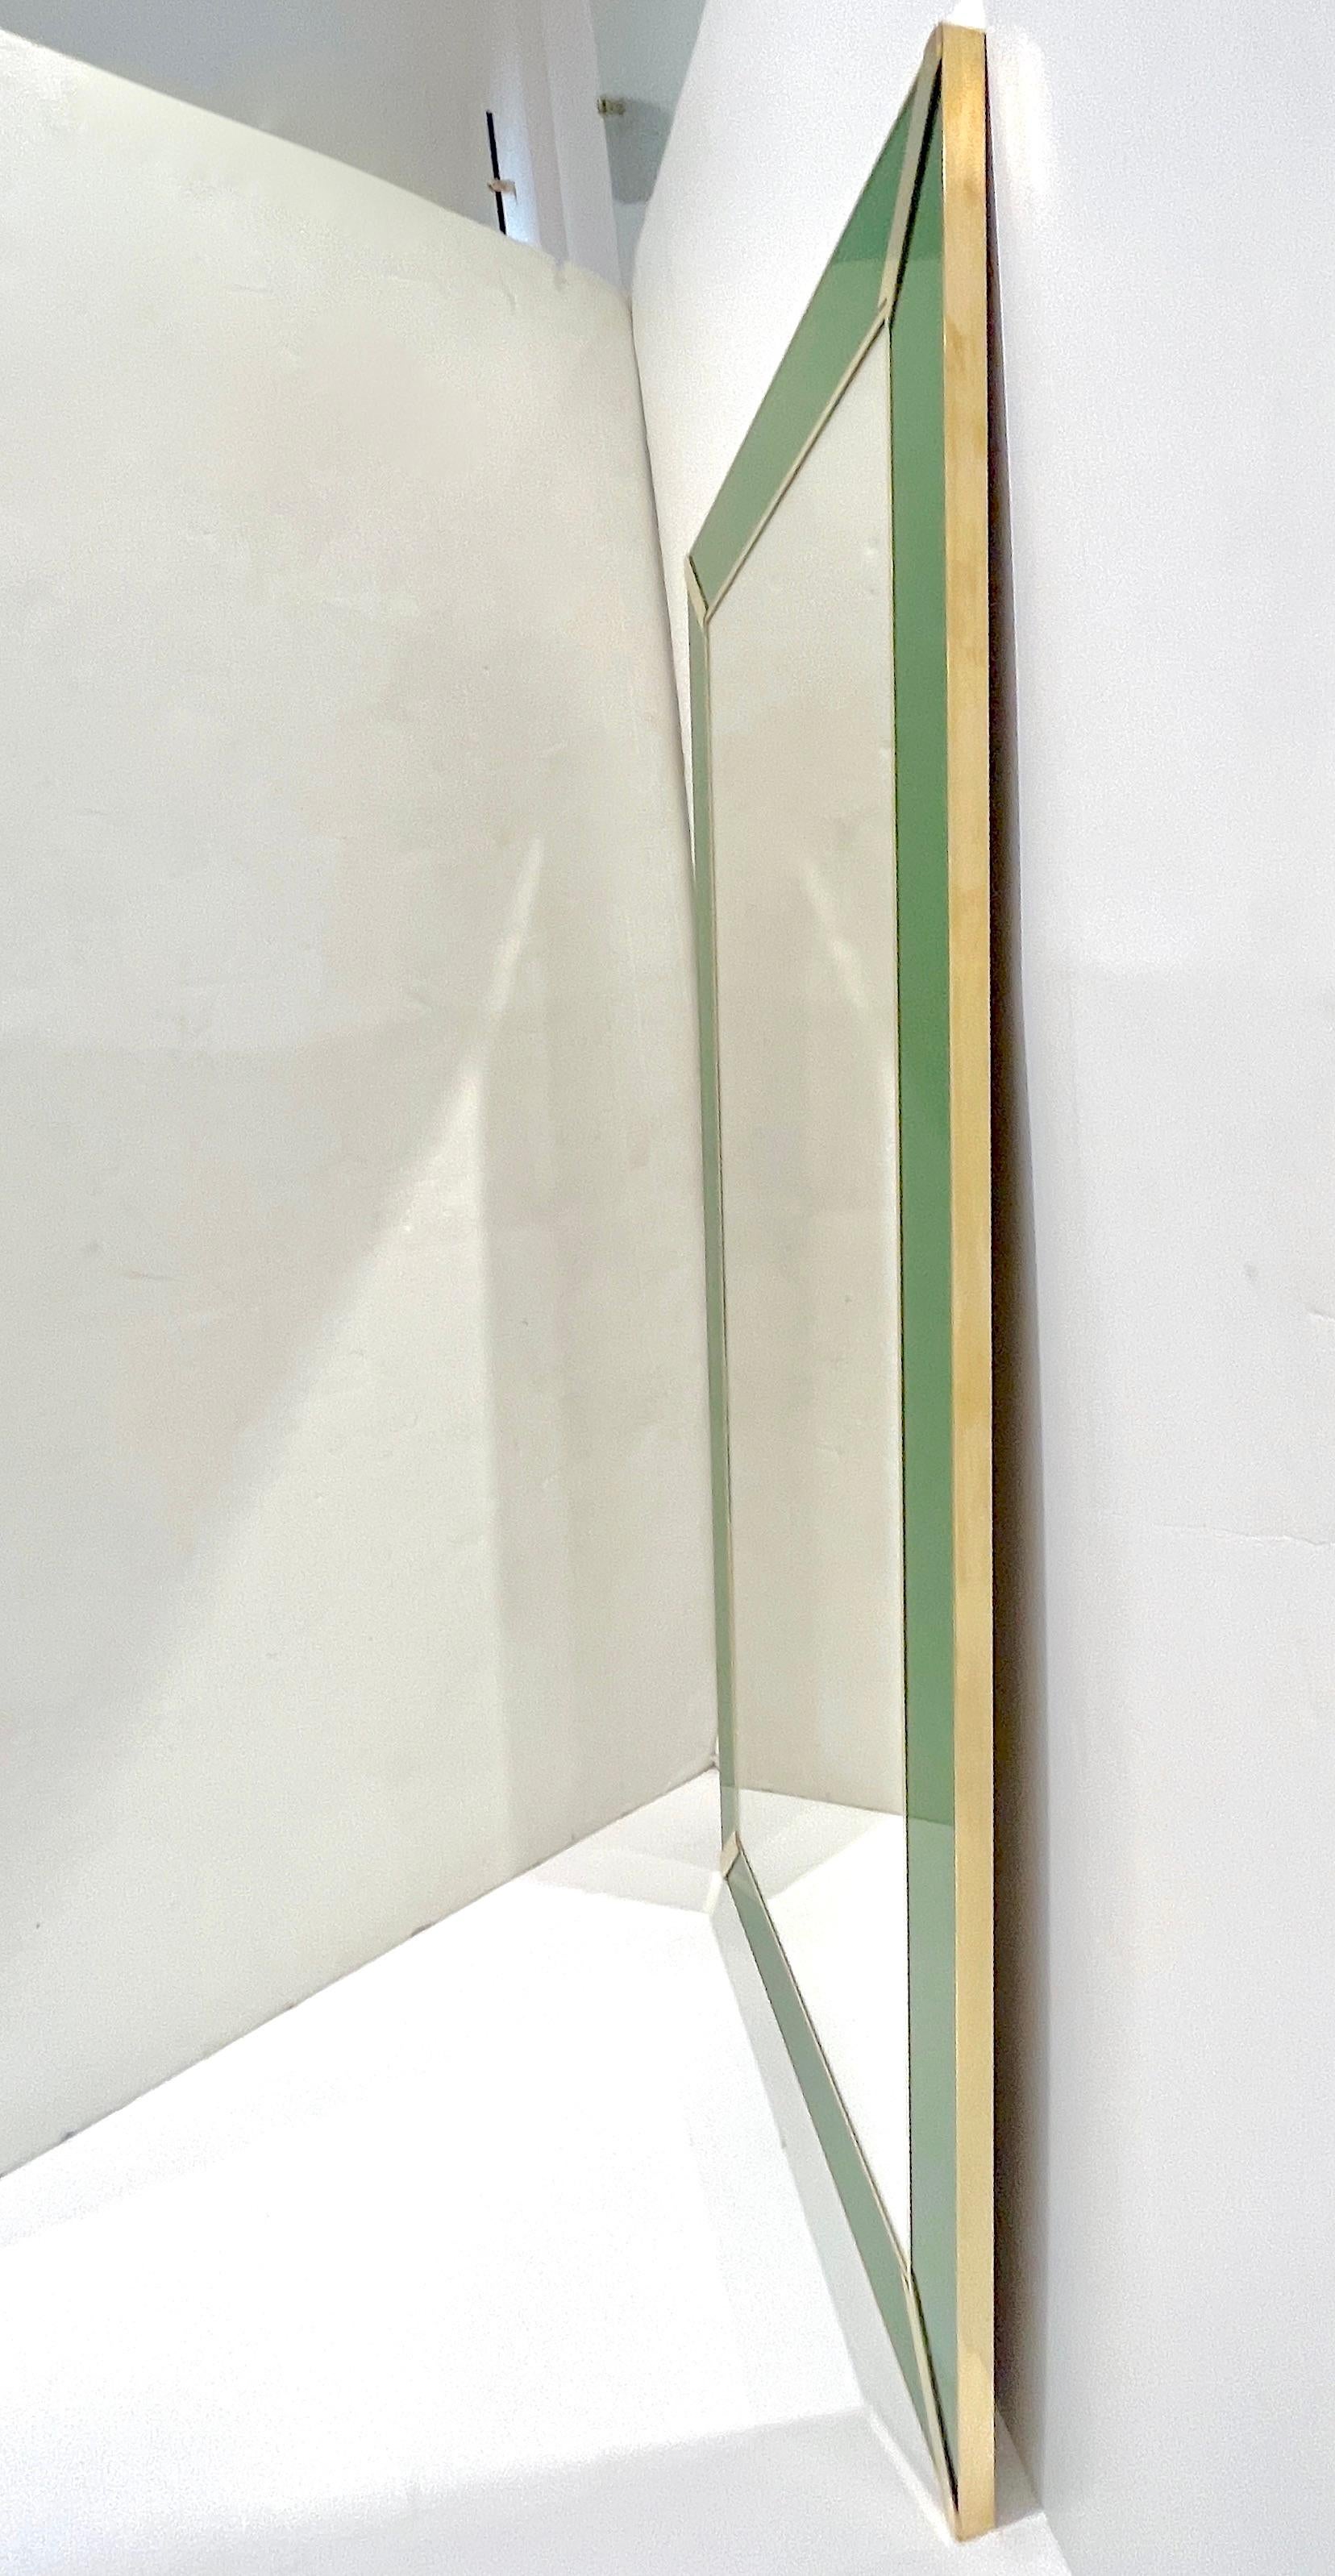 Organic Modern Contemporary Italian Minimalist Design Green Glass Mirror with Brass Accents For Sale